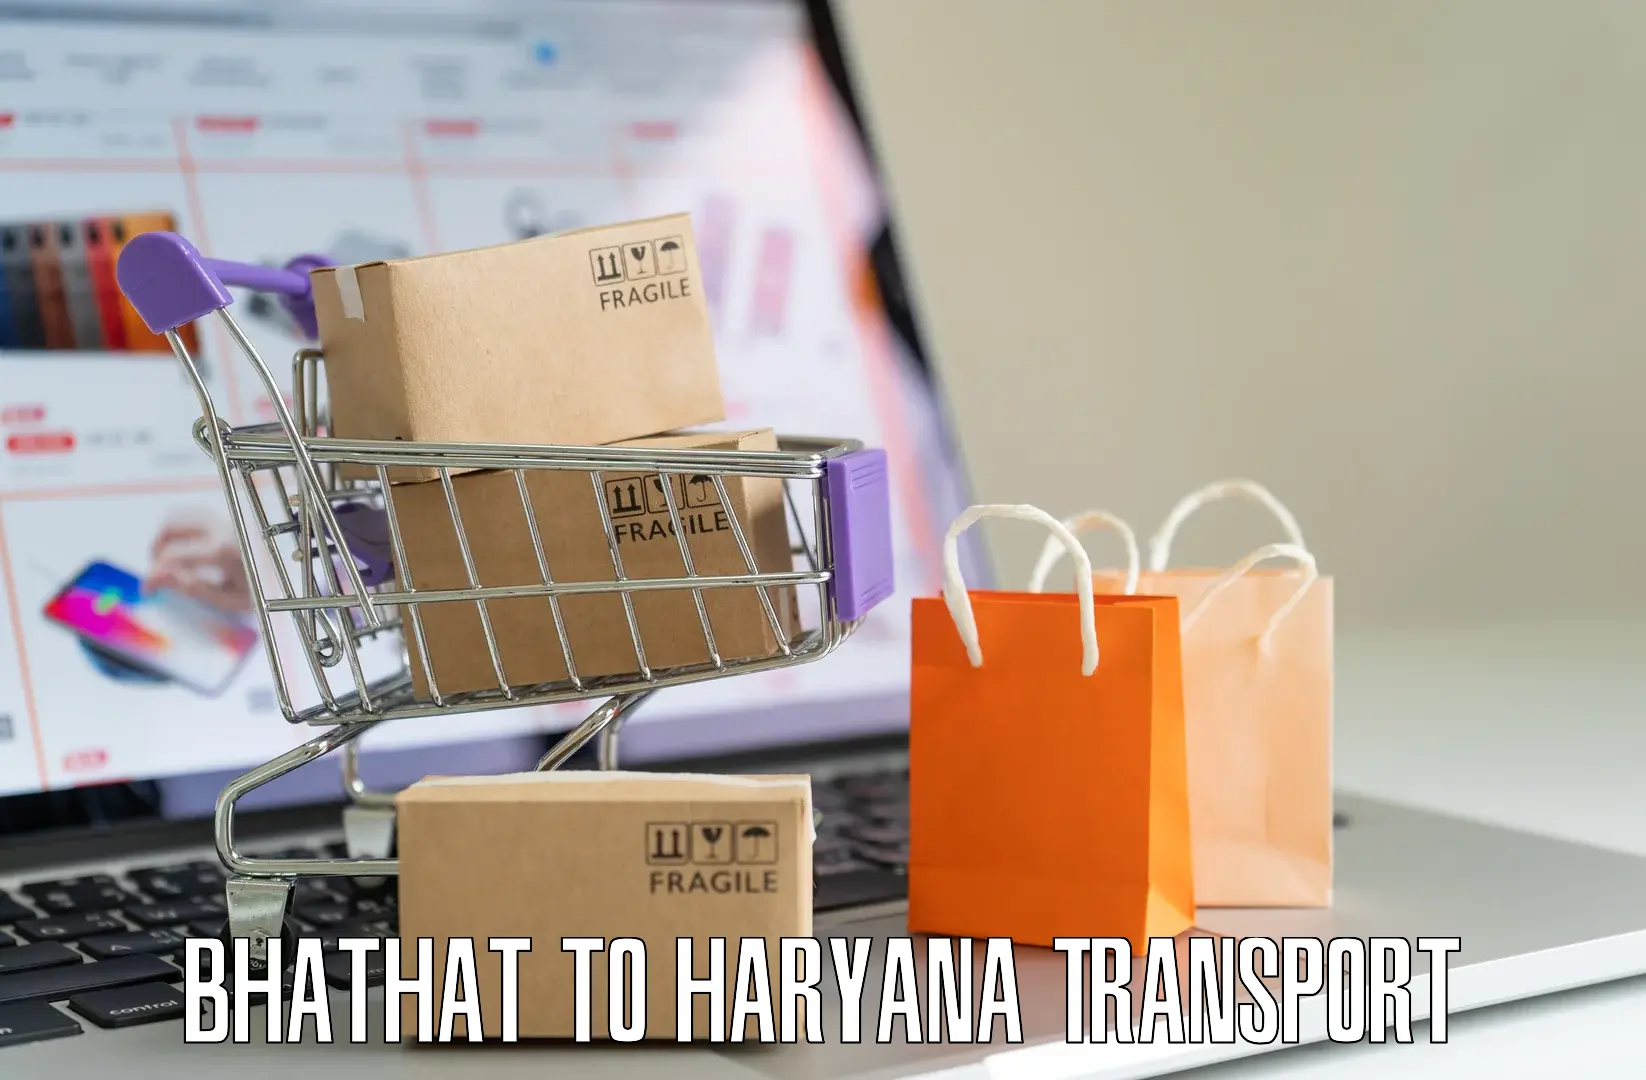 Container transport service Bhathat to NCR Haryana